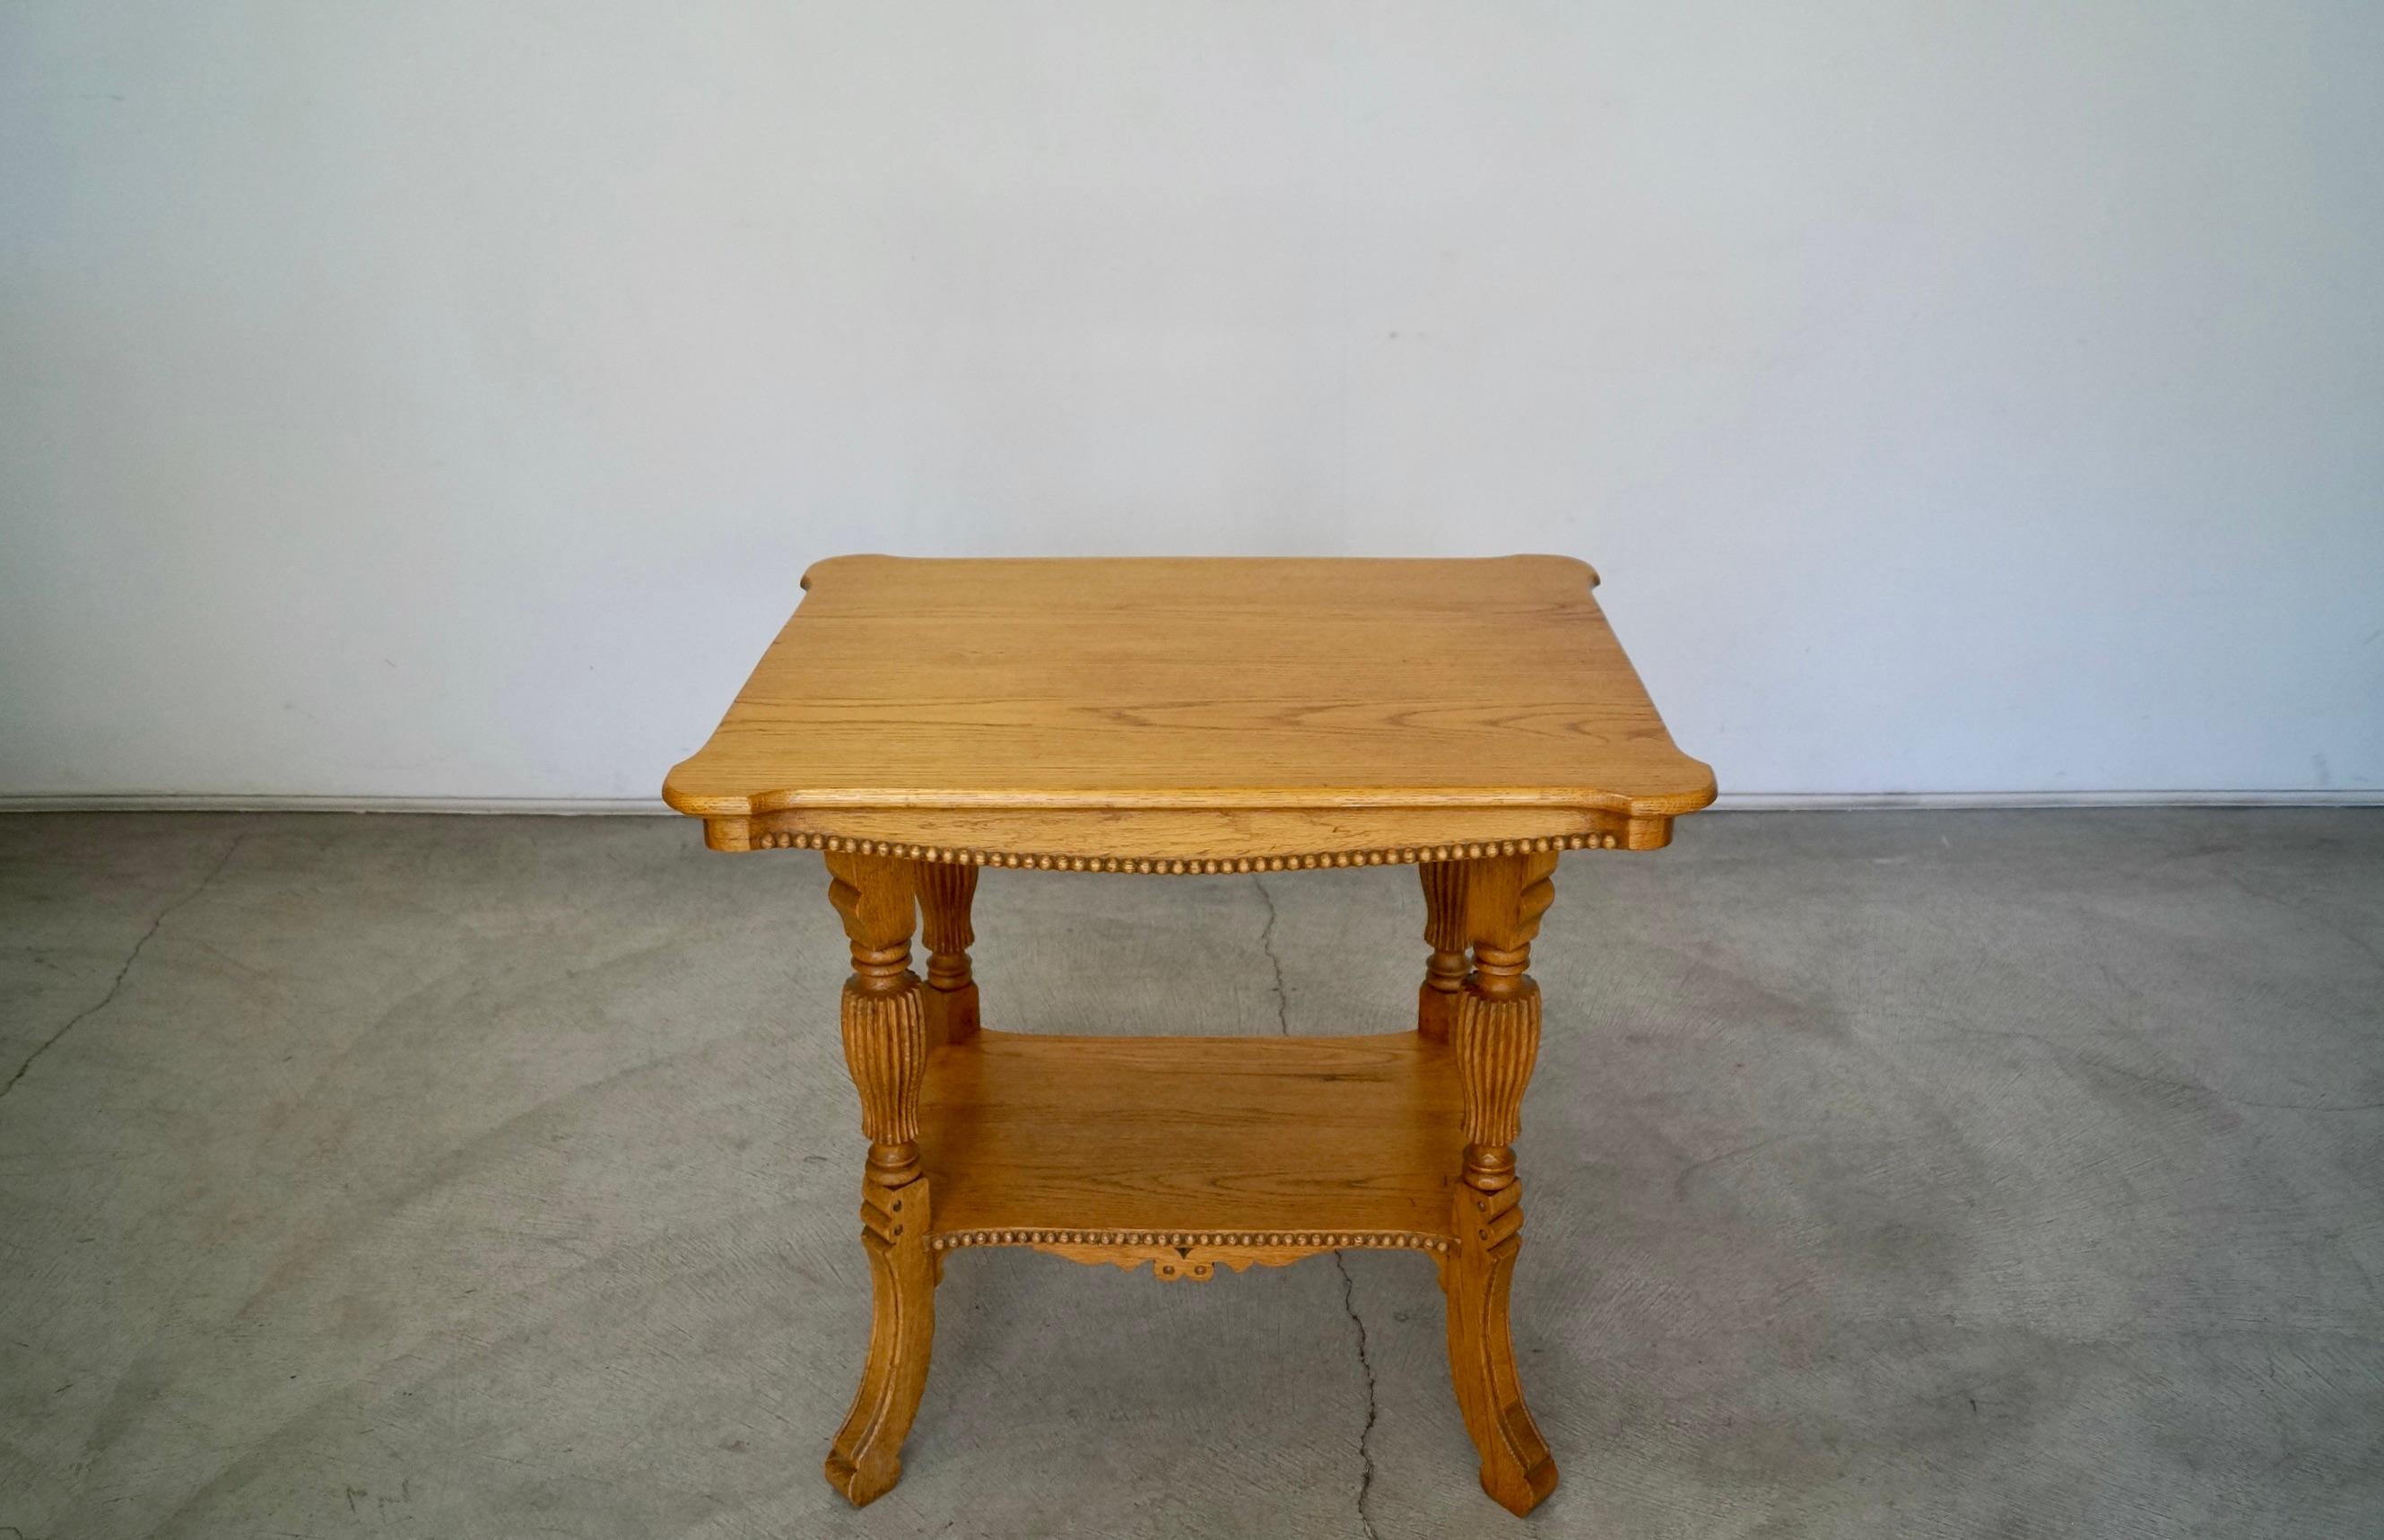 ntique end table for sale. From the late 1800's / early 1900's. Made of solid oak with incredible wood work and detail. This was previously refinished in a natural oak finish. It's a beautiful accent table with great construction. It has a shelf